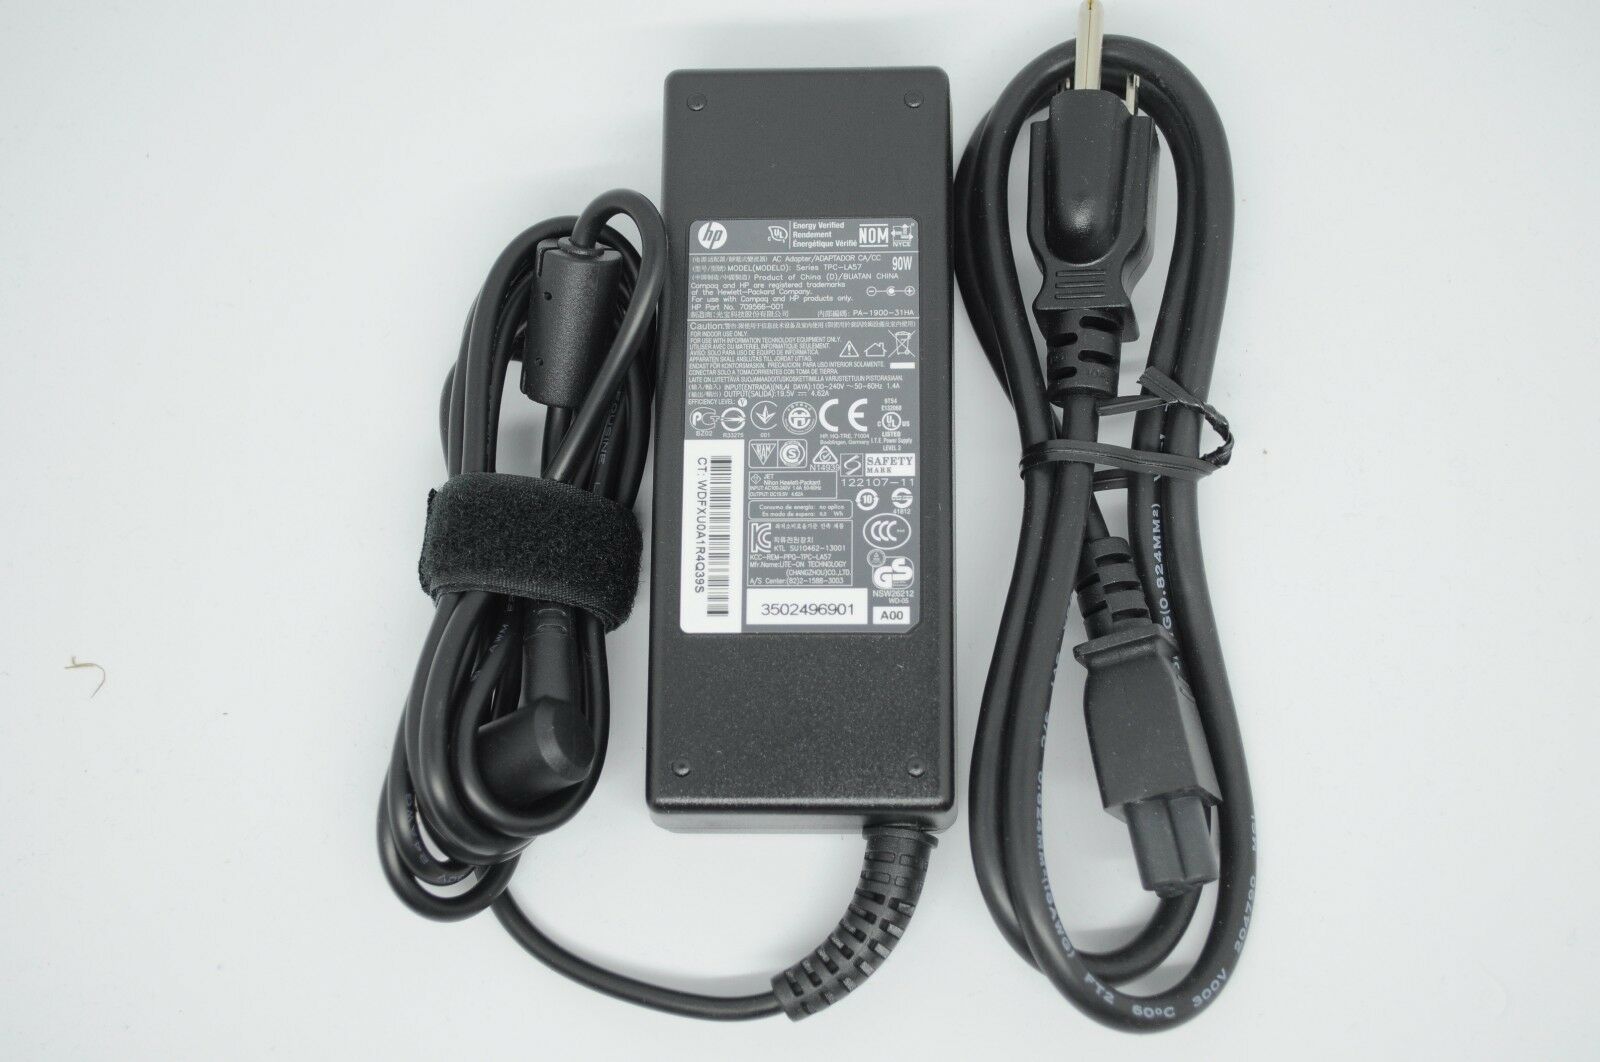 NEW 19.5V 4.62A HP TPC-CA57 709566-001 PC 90W AC Power Adapter Charger for HP 18-5000 All In One Desktop